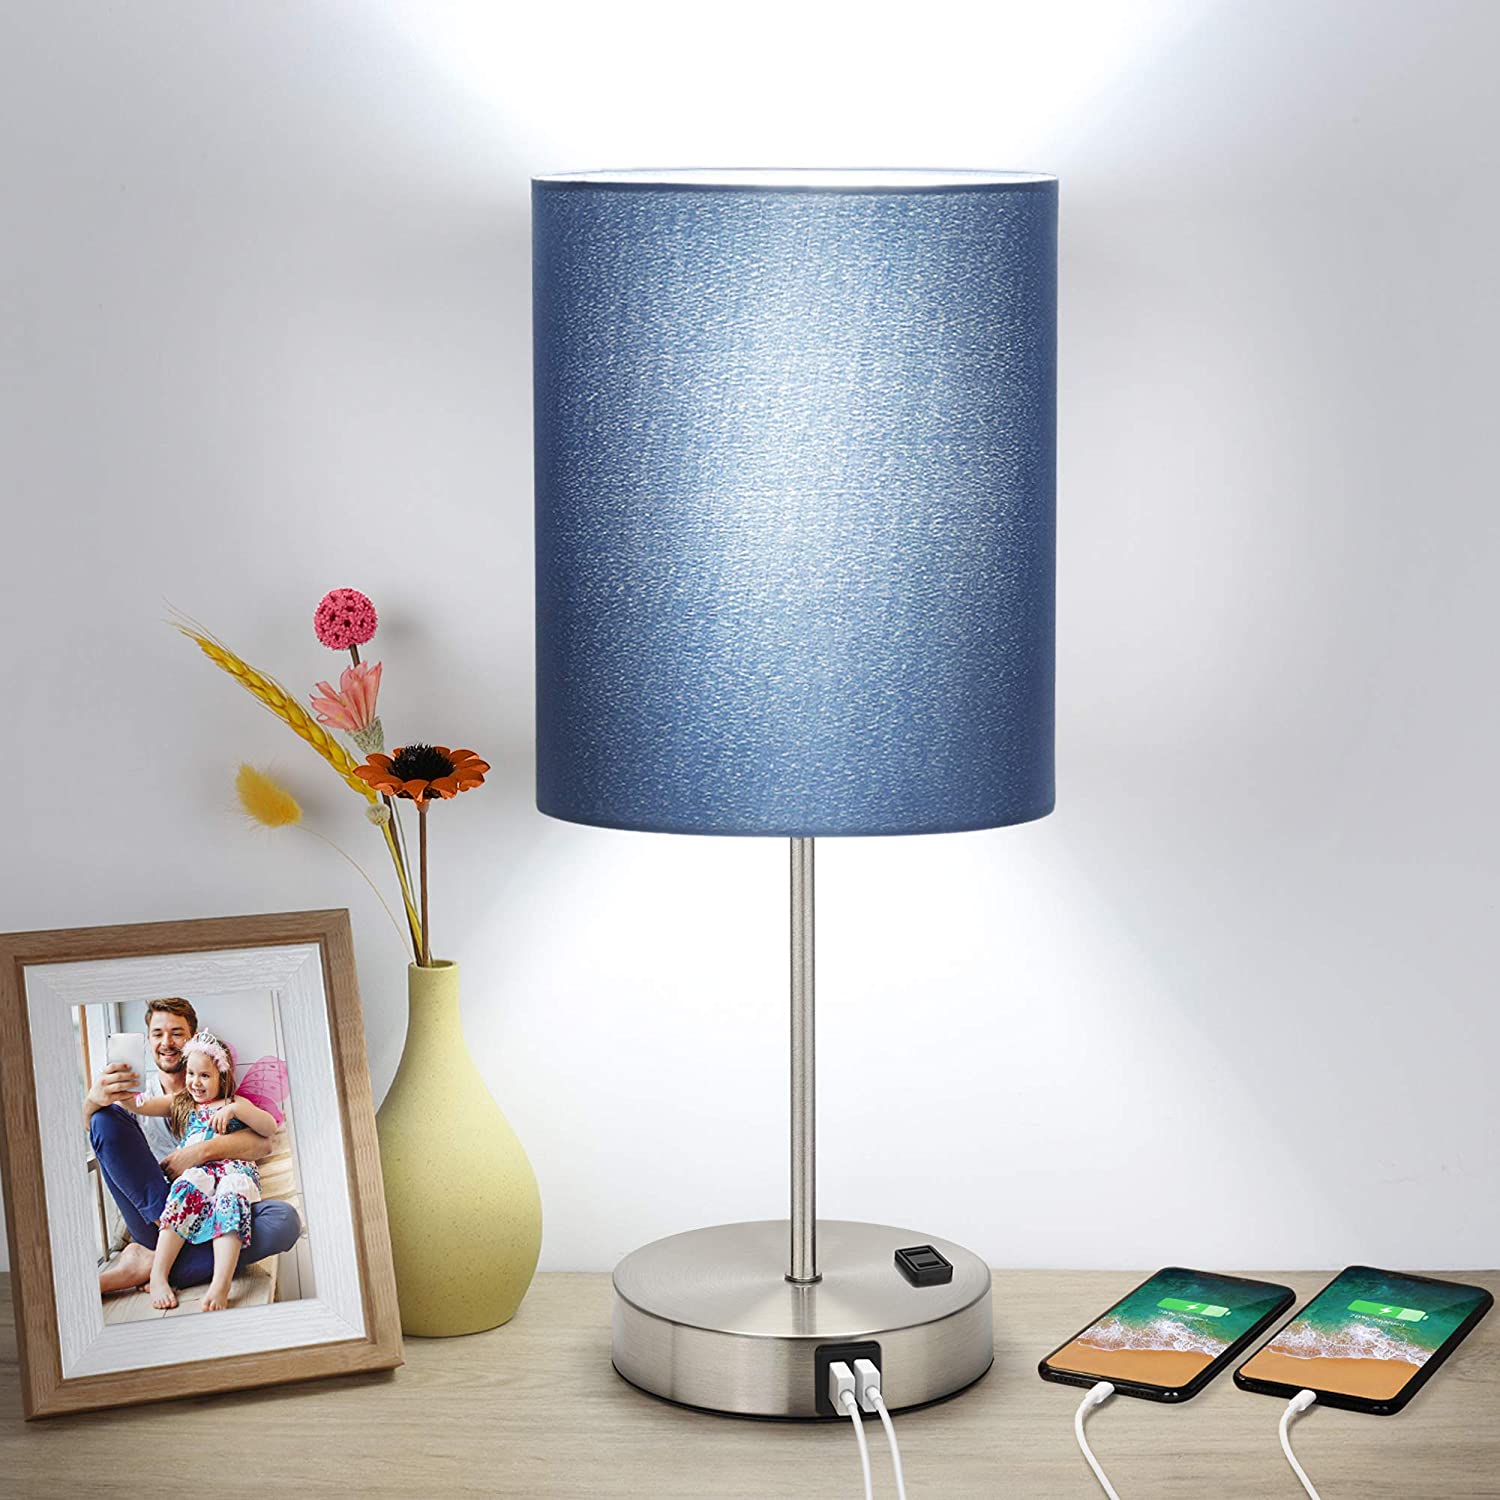 Photo 1 of Touch Control Table Lamp 3 Way Dimmable Bedside Desk Lamp with 2 USB Ports  AC Outlet Blue Fabric Shade Modern Nightstand Lamp for Bedroom Living Room 60W 5000K Daylight LED Bulb Included Silver